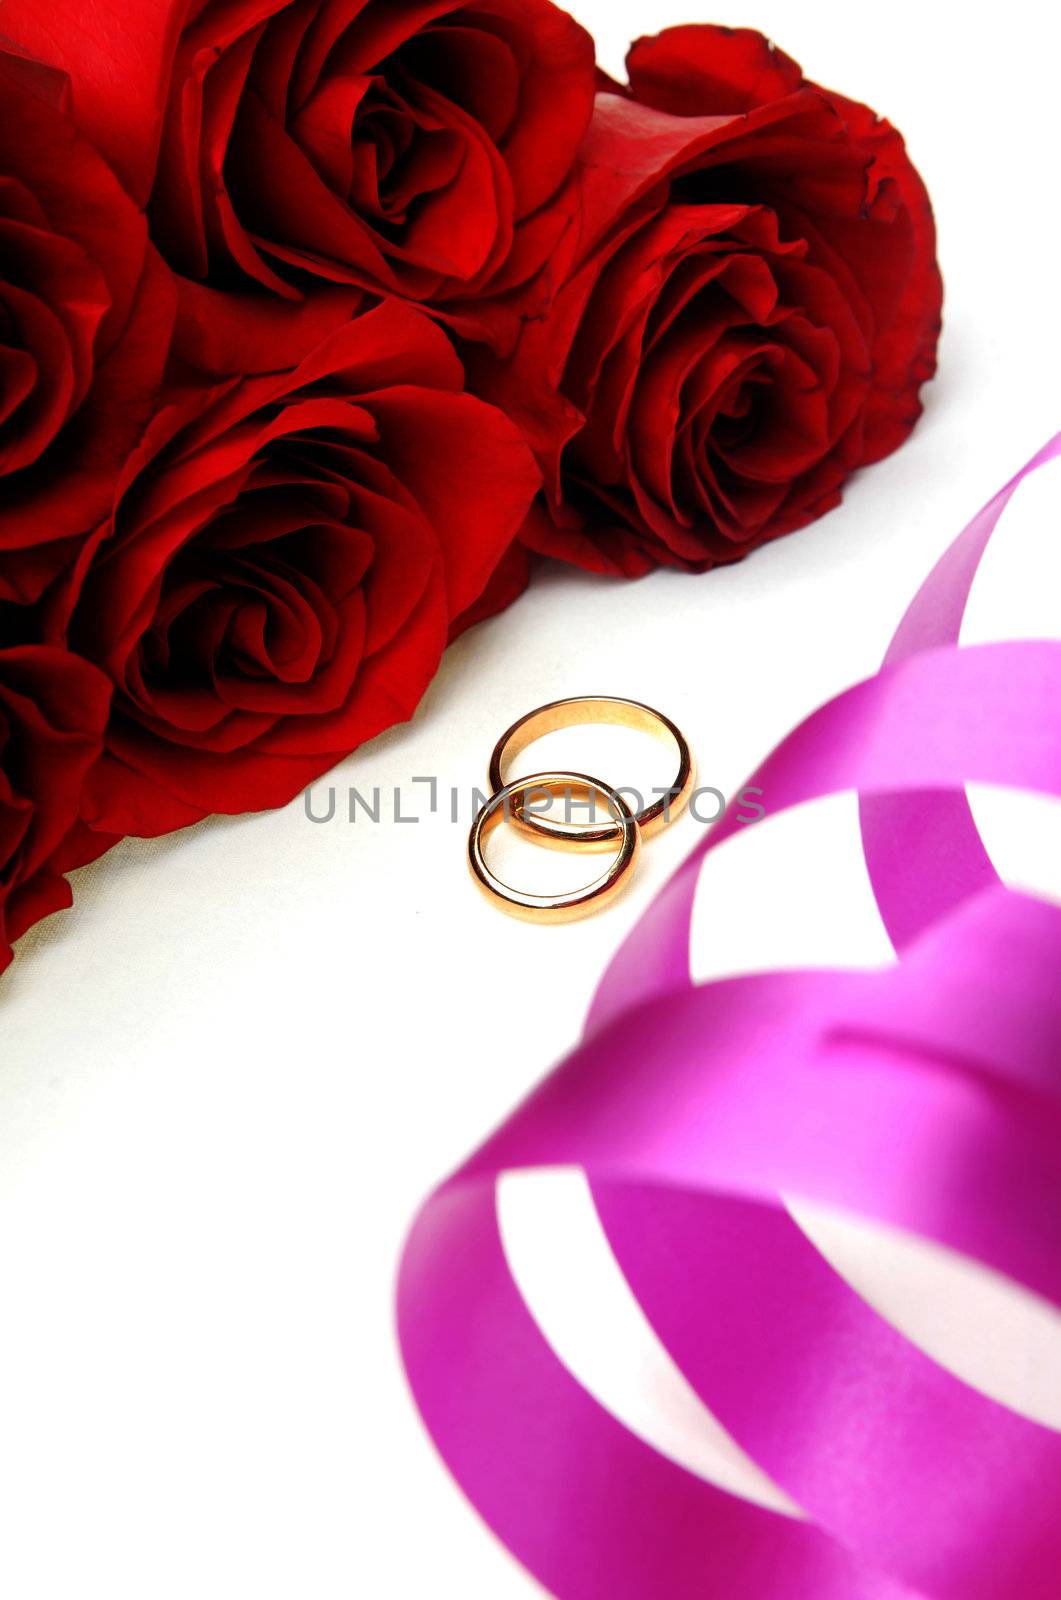 Bunch of flowers and wedding rings with ribbon